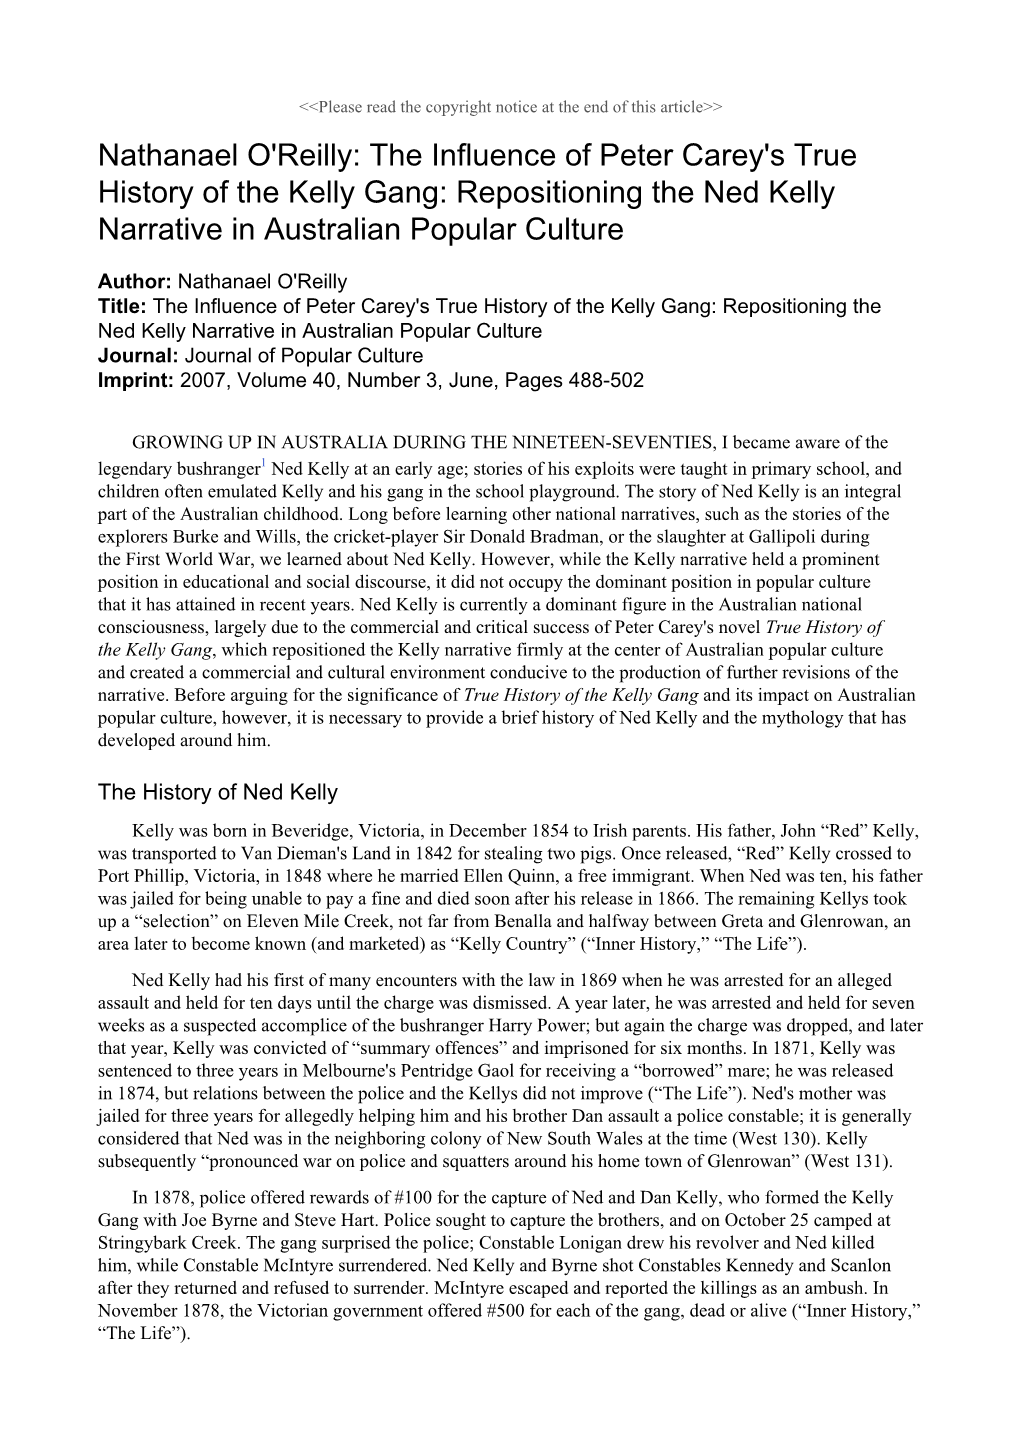 The Influence of Peter Carey's True History of the Kelly Gang: Repositioning the Ned Kelly Narrative in Australian Popular Culture